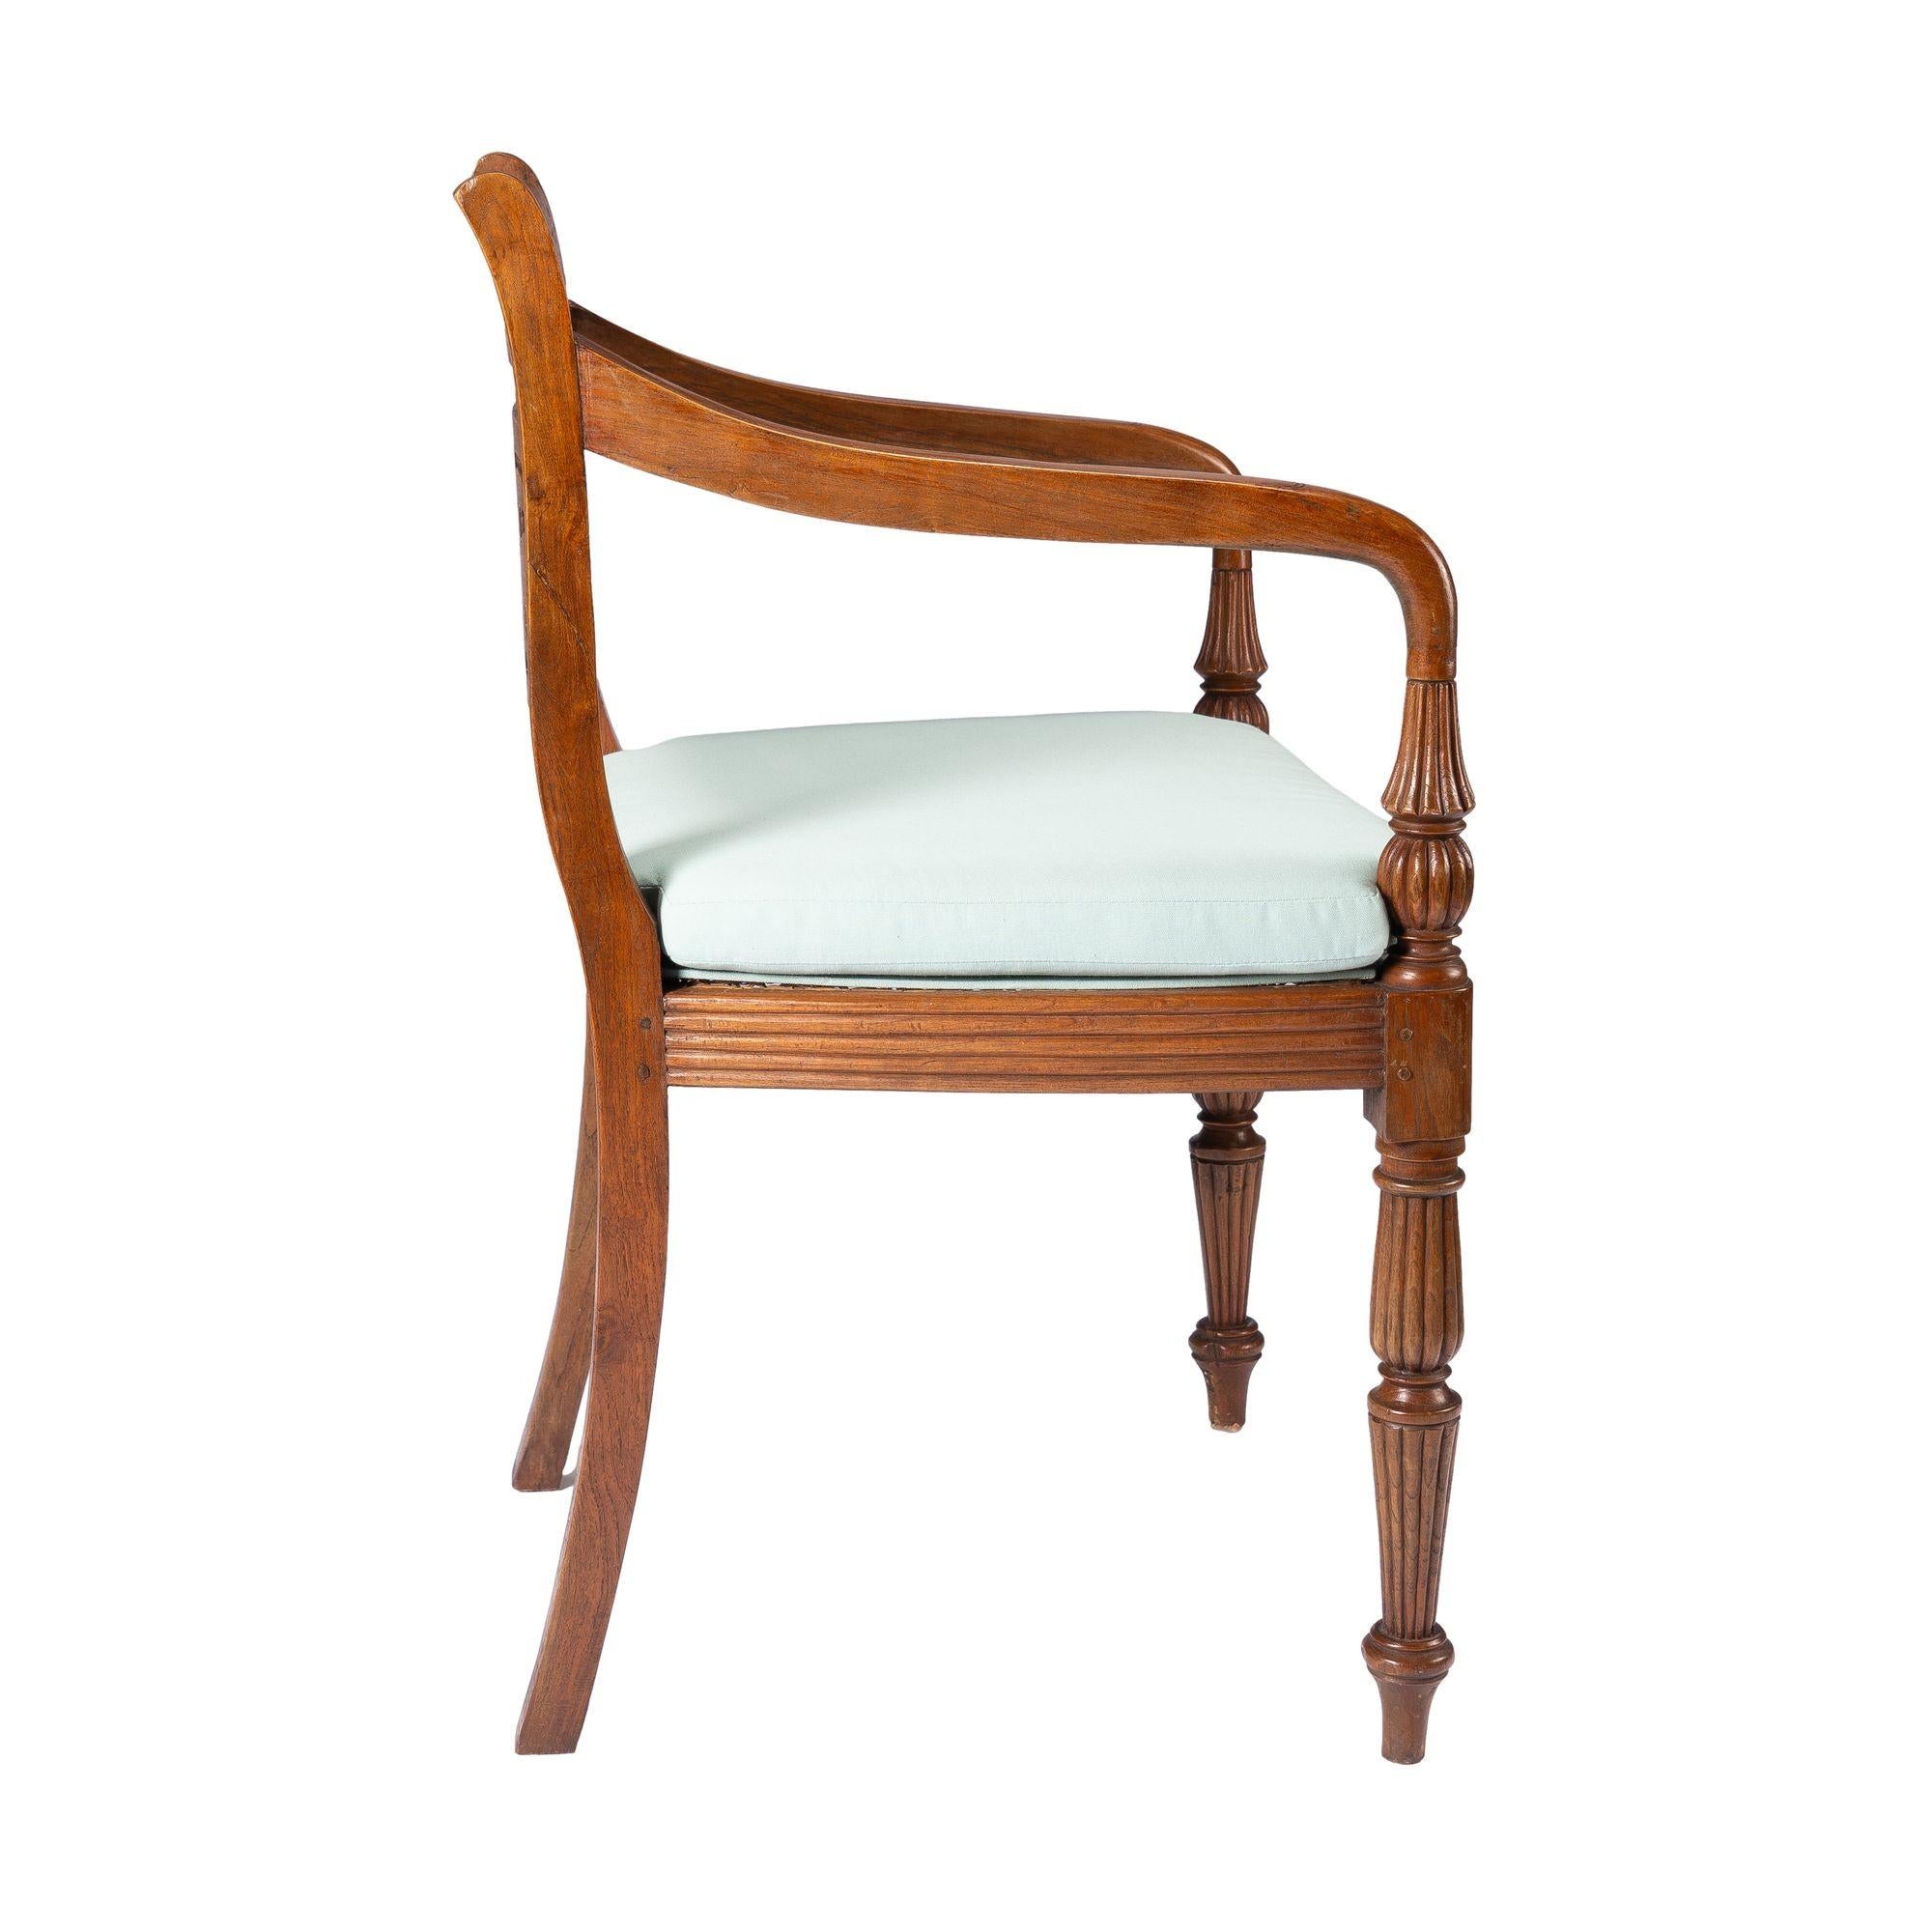 Upholstery Anglo-Indian teak arm chair with caned seat and cushion, 1900-50